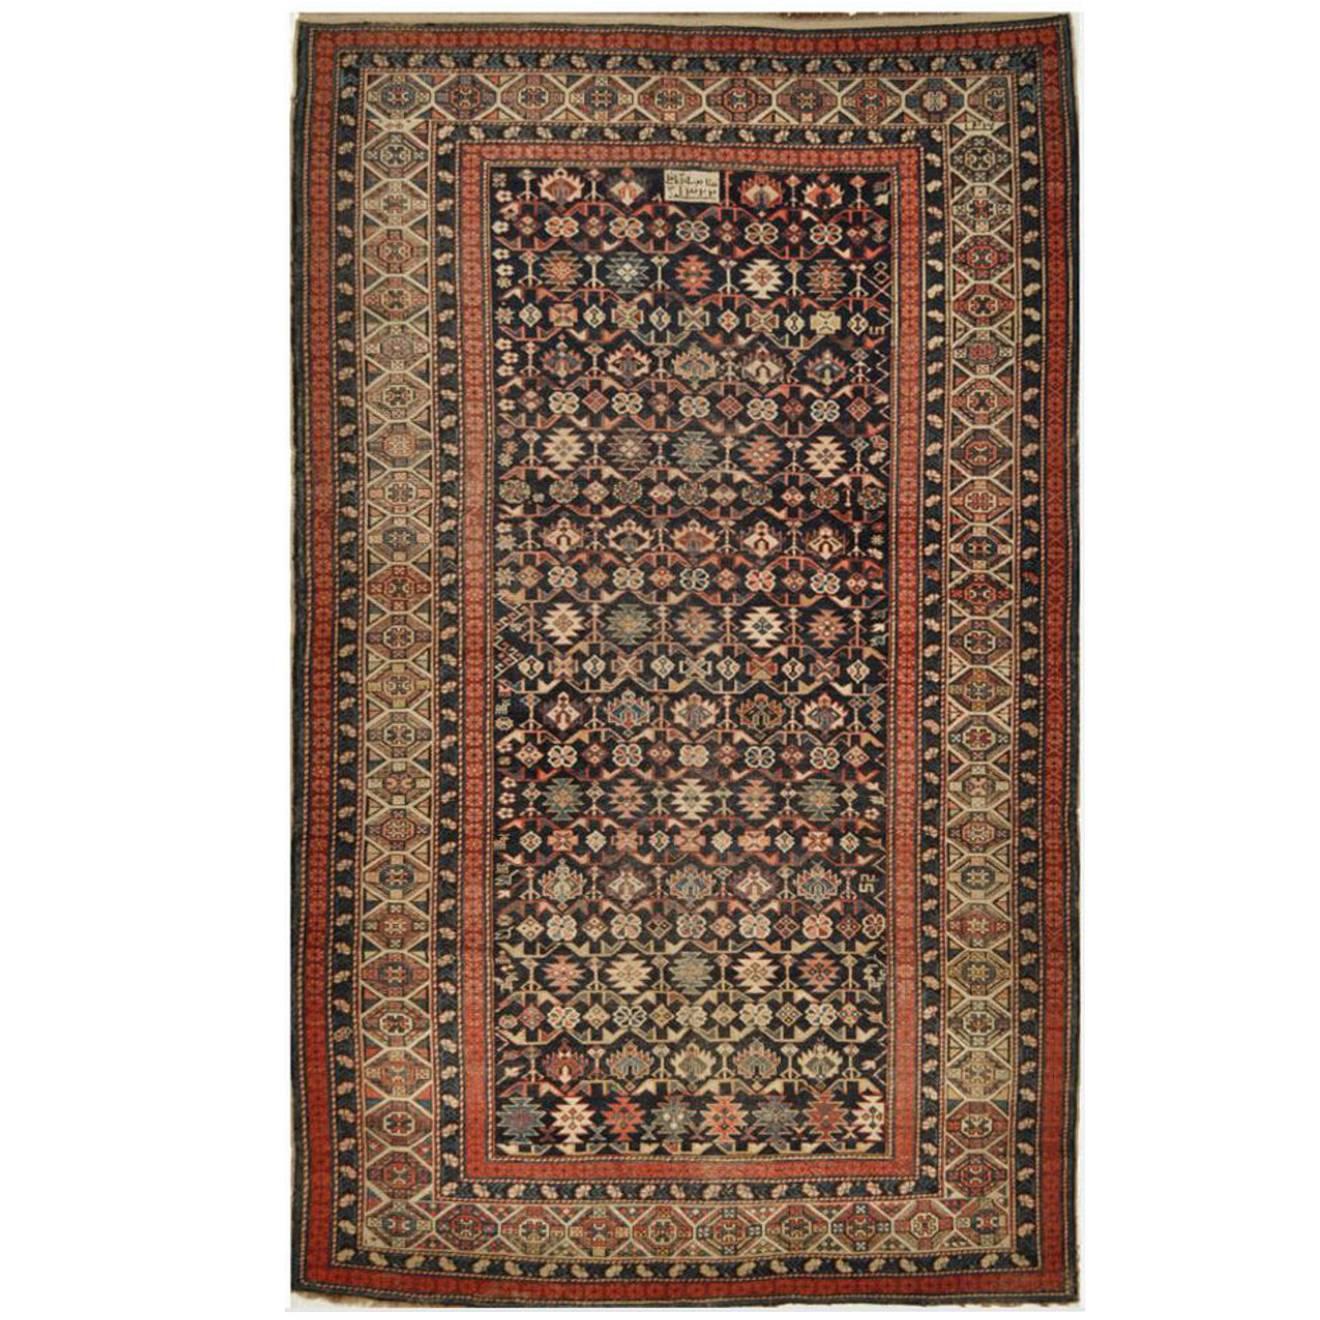 Antique Hand-Knotted Wool Caucasian Shirvan Rug